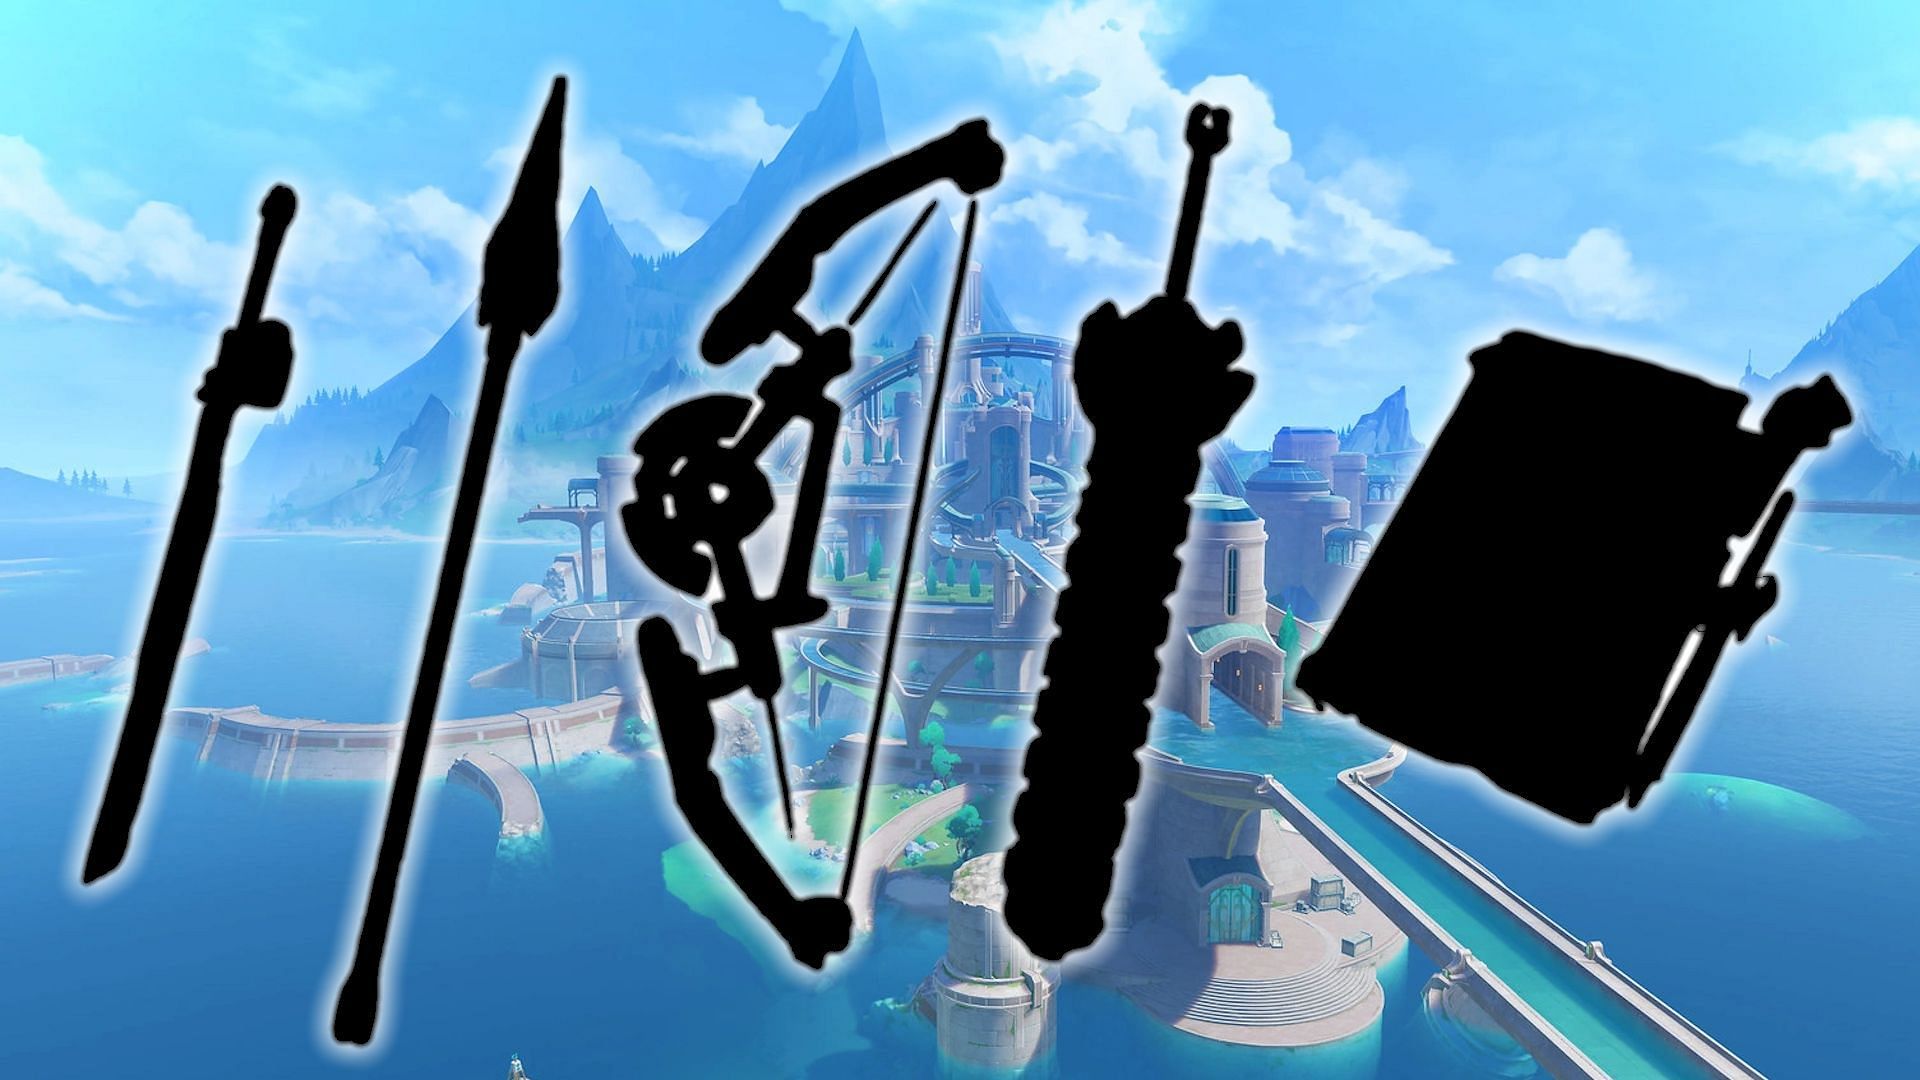 The silhouettes of the new leaked weapons